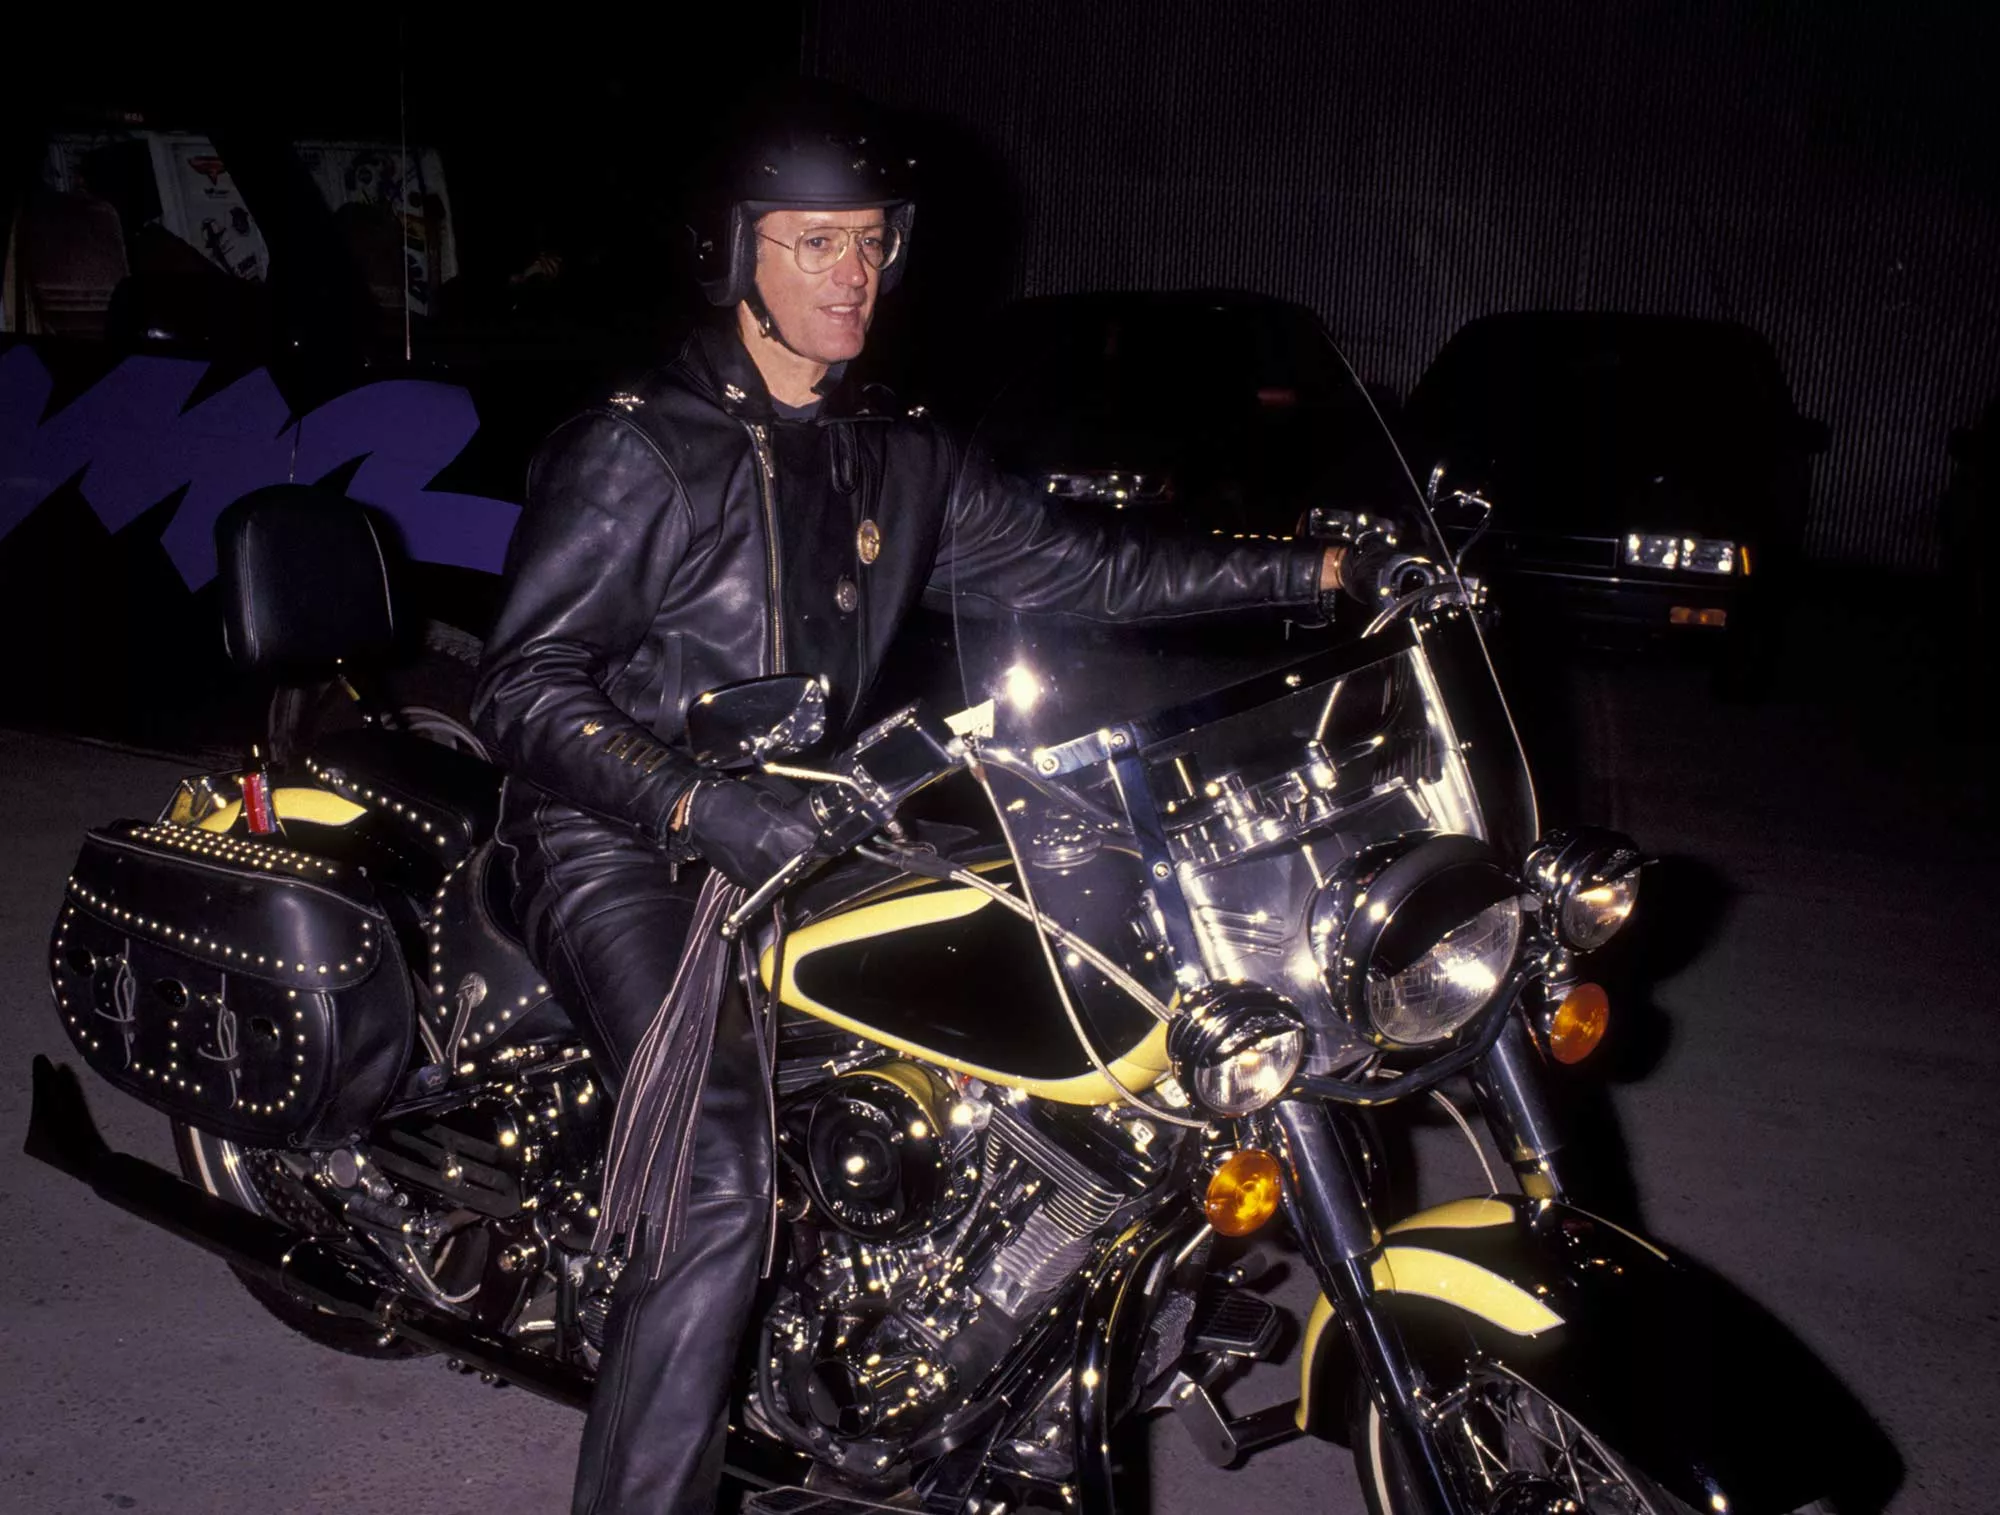 Peter Fonda, known for his Harley-riding role in Easy Rider, is shown here on a Softail Heritage.